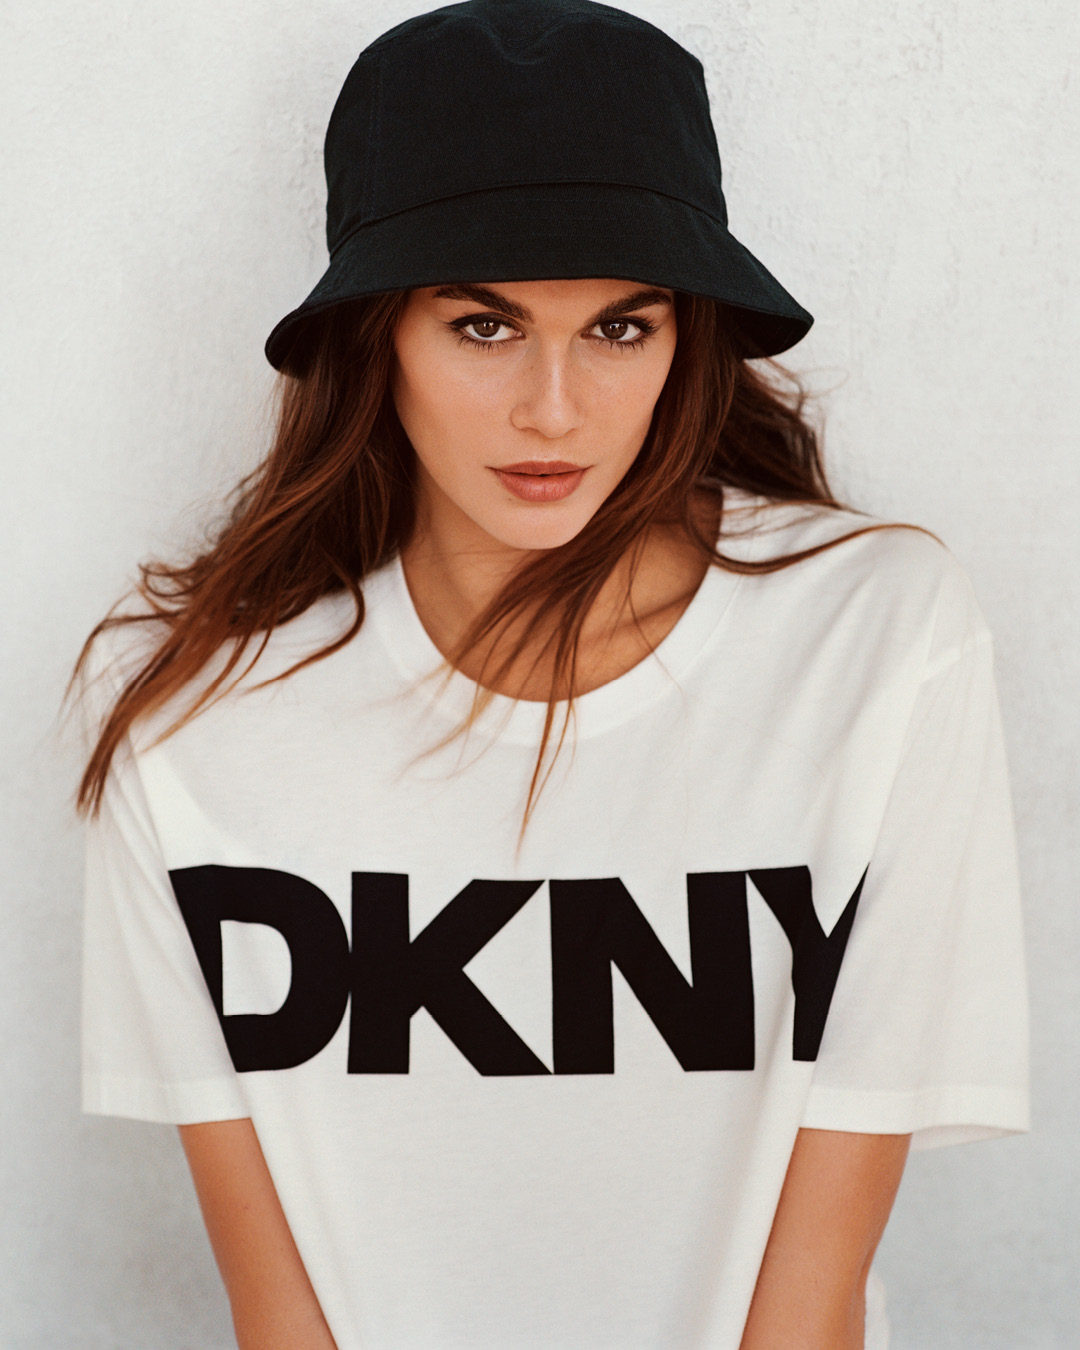 Top more than 134 dkny logo best